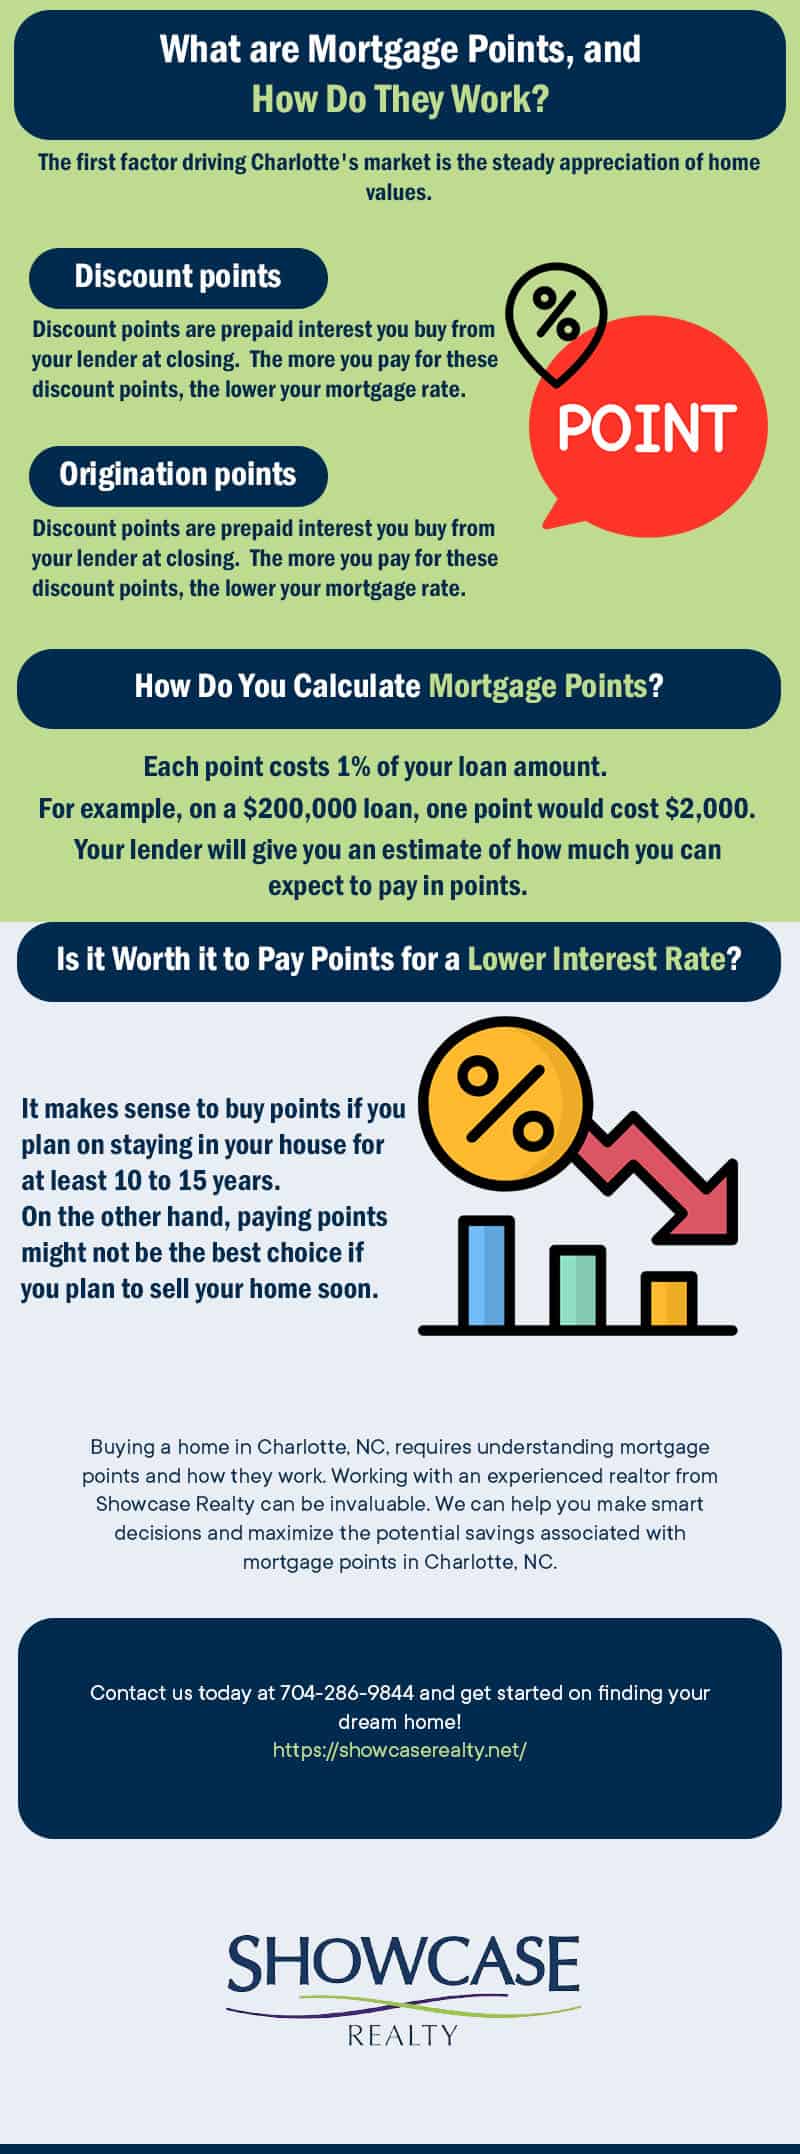 Charlotte, NC Home Value - Make the most of your Charlotte home-buying experience by learning about mortgage points and how they can help you save on your loan.